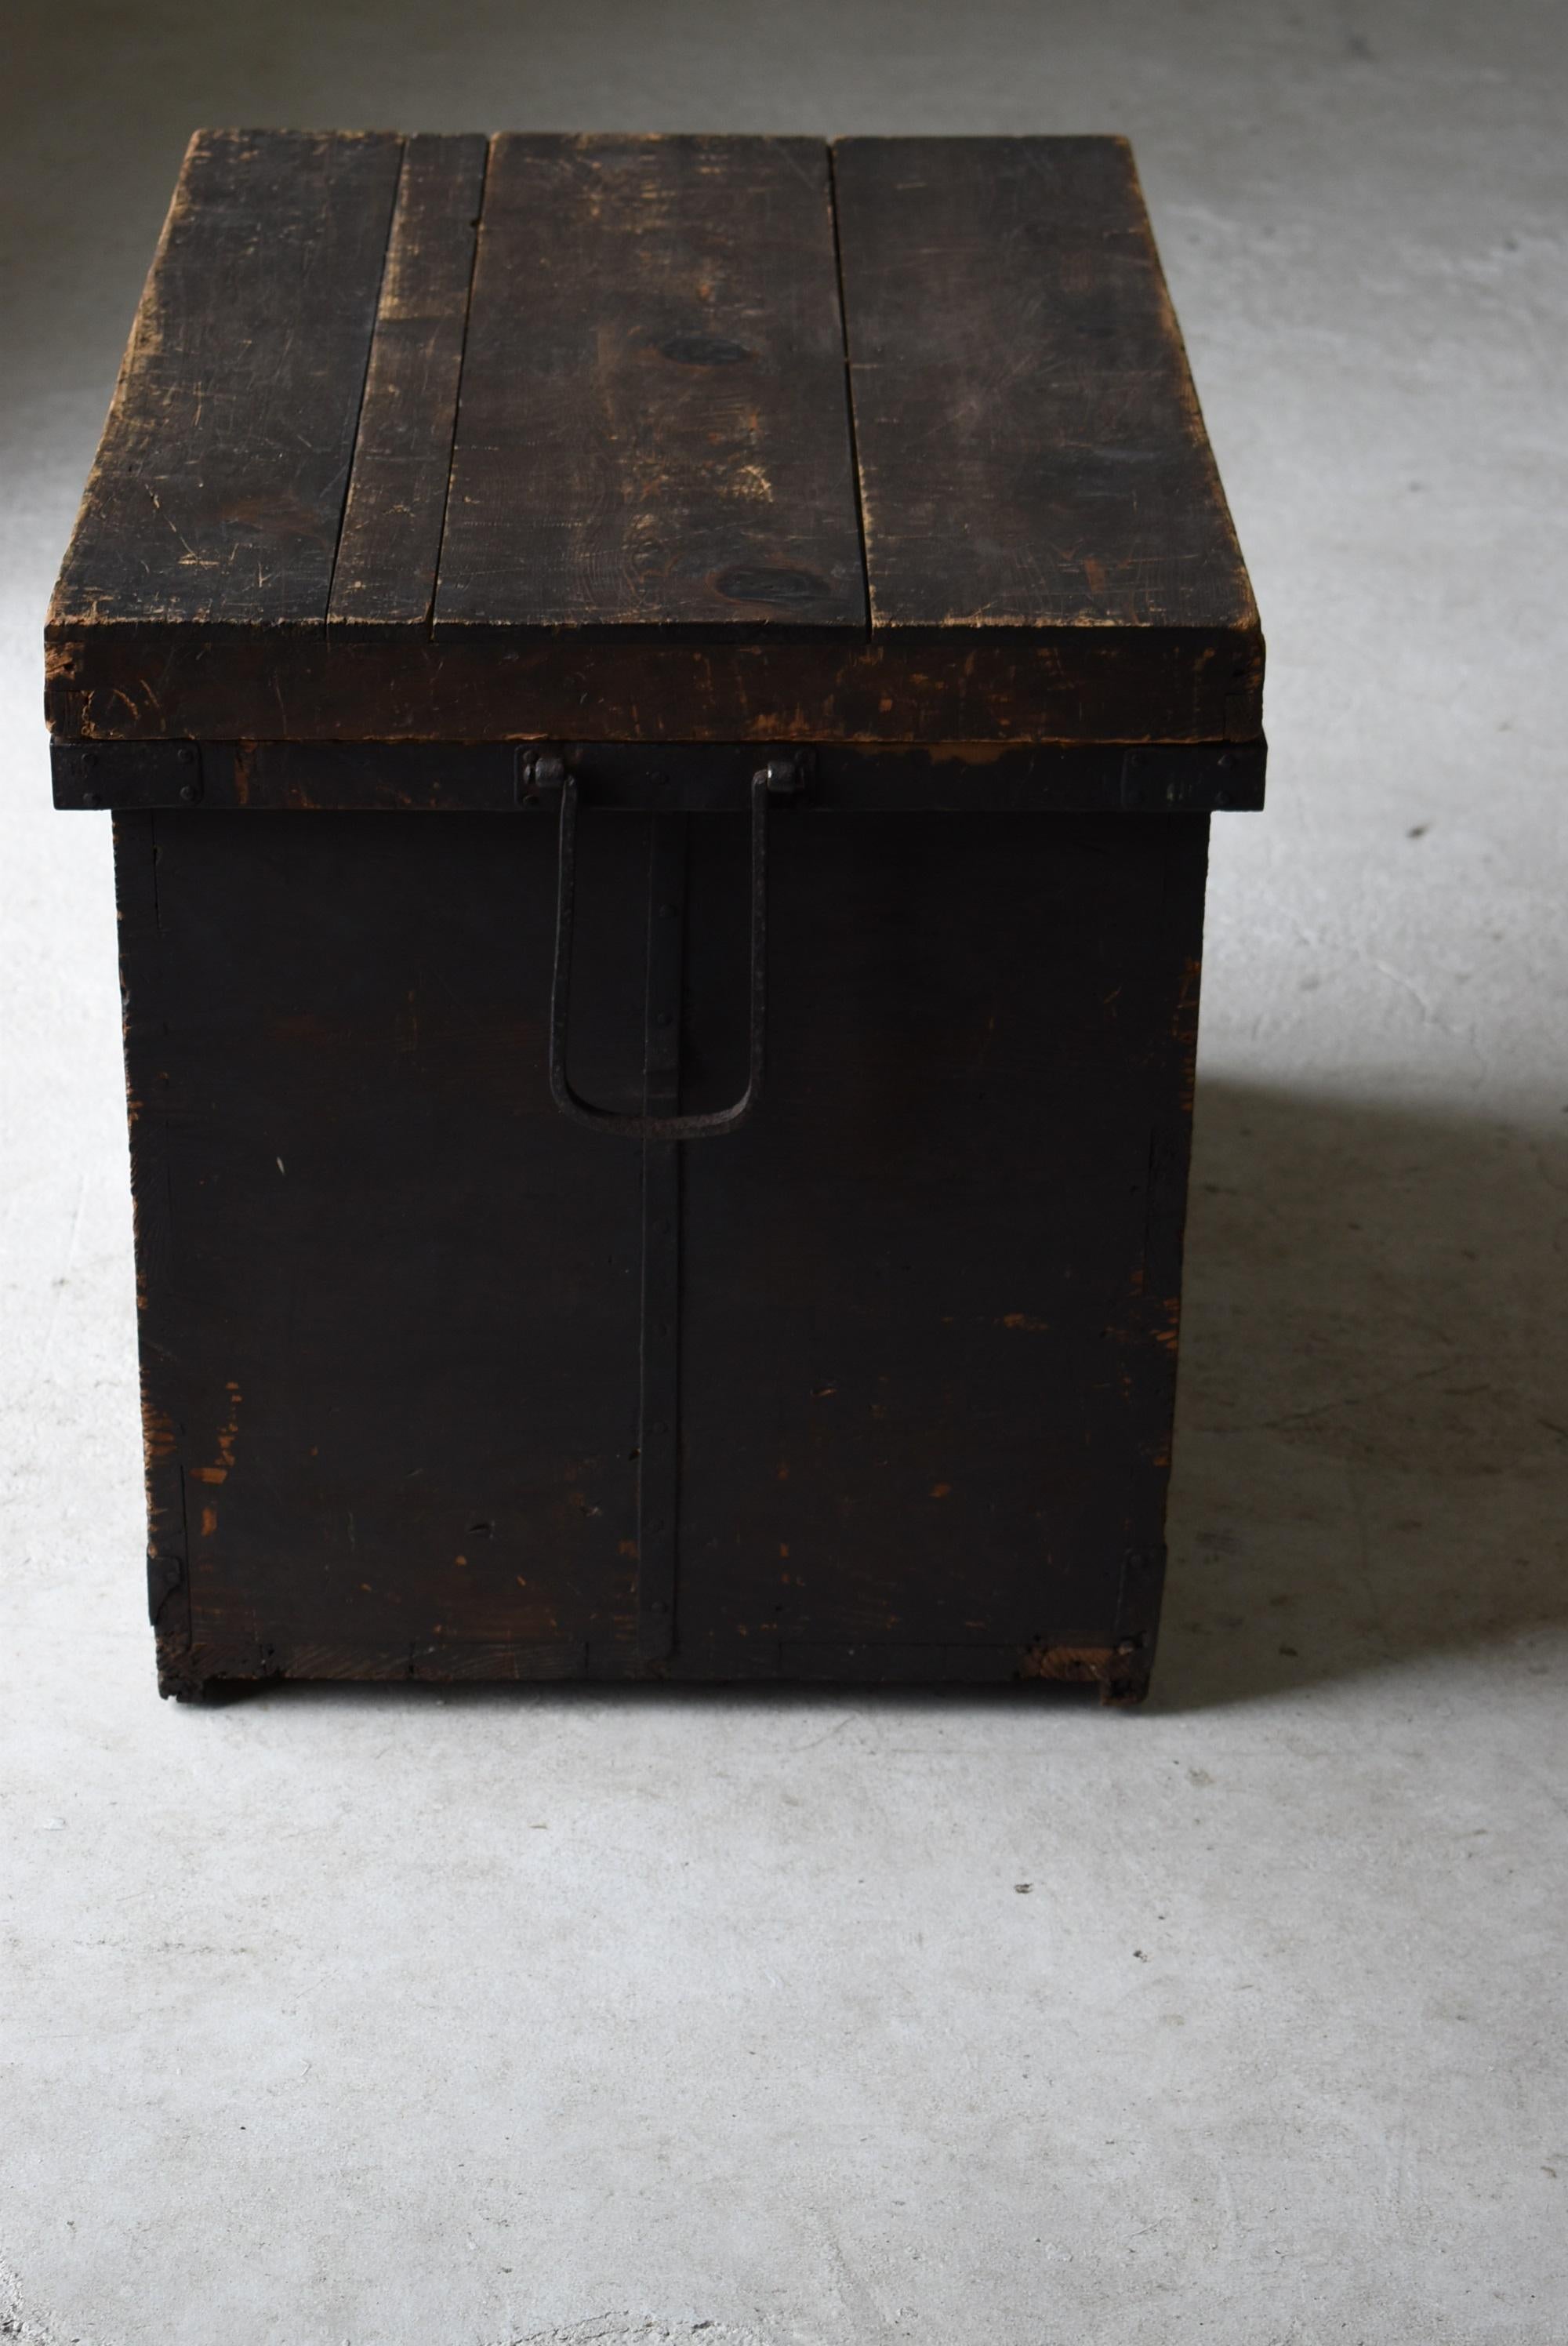 Japanese Antique Wooden Box 1860s-1900s/Storage Sofa Table Tansu Coffee Table 7